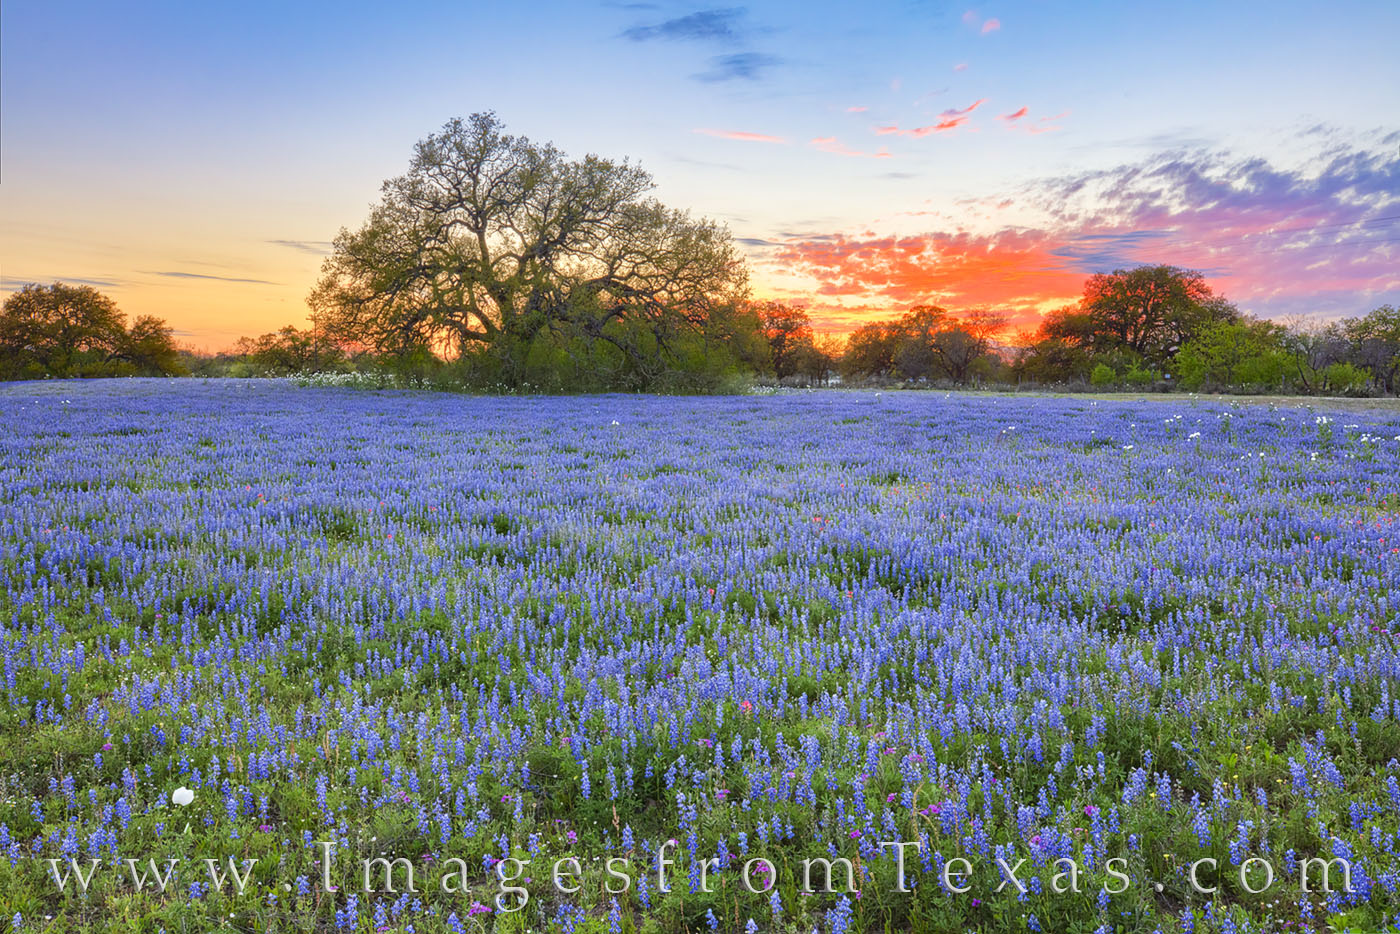 Sunset south of San Antonio brough beautiful orange and blue to a bluebonnets landscape on this warm March evening. All was quiet...